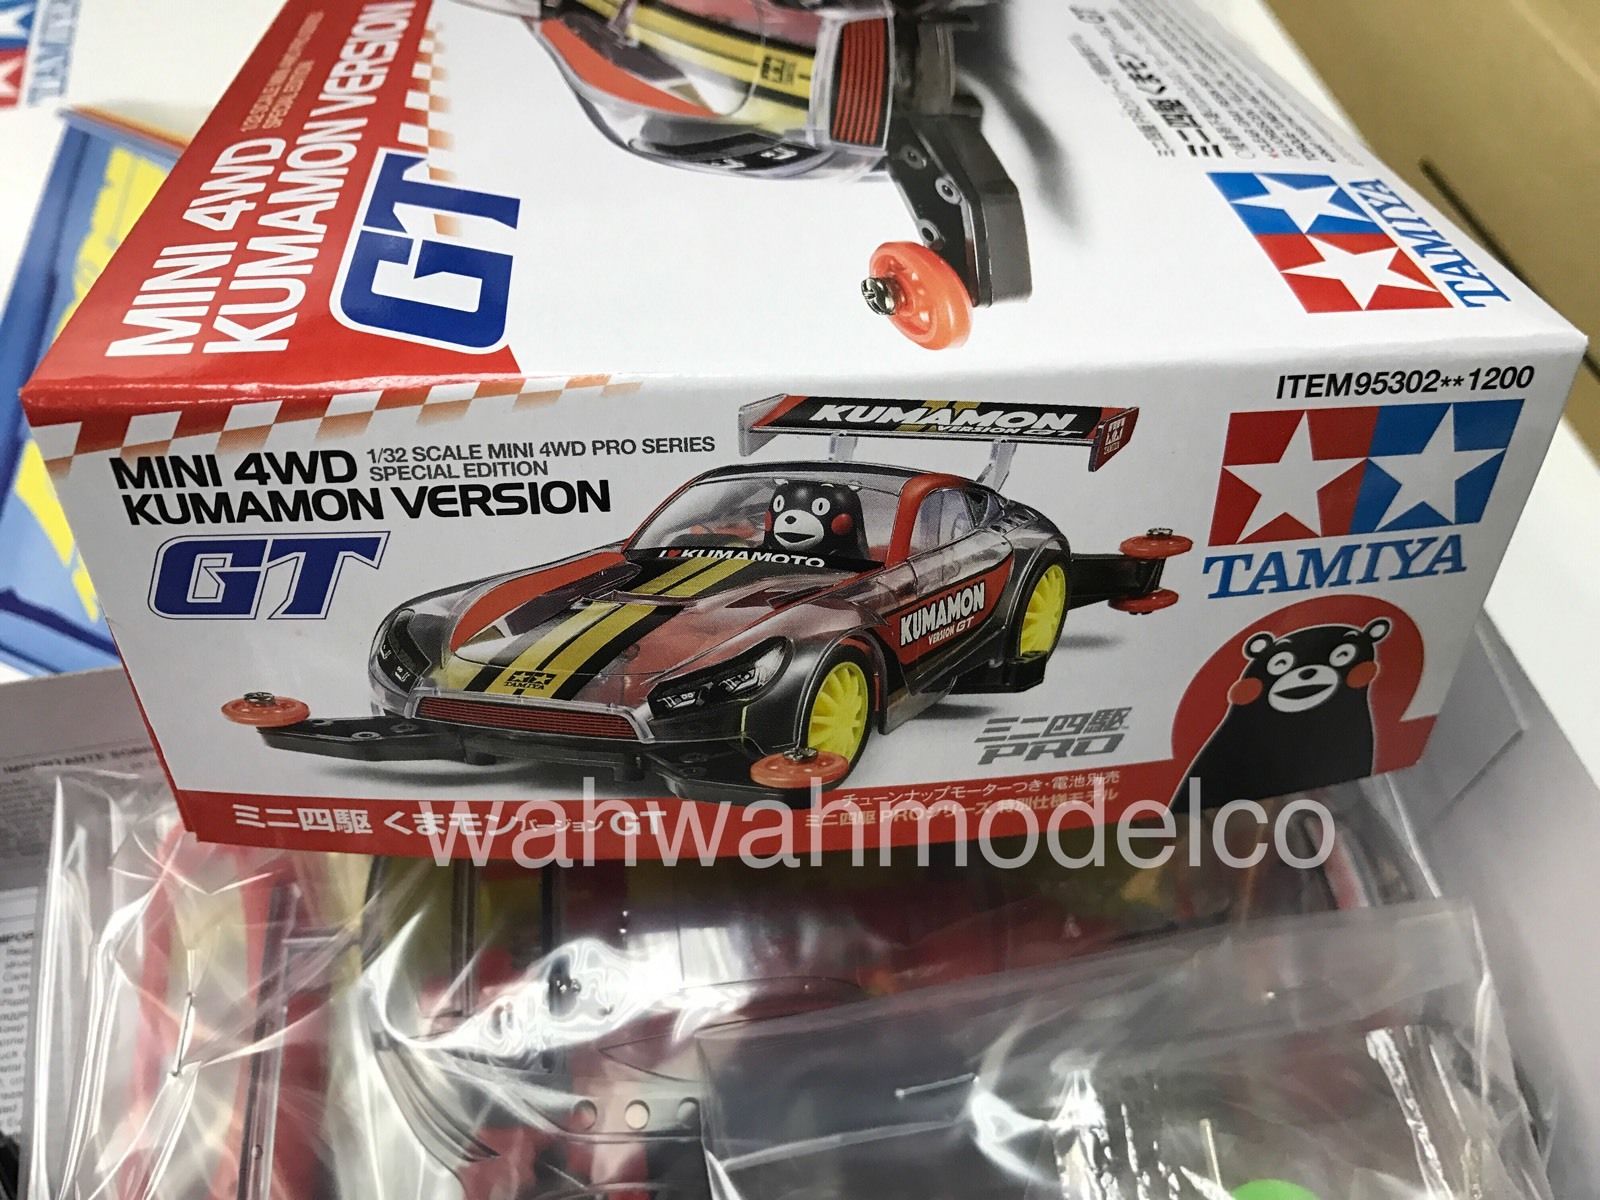 Tamiya Mini 4wd Kumamon Version GT 95302 MA Chassis From Japan 1a3220 for sale online 